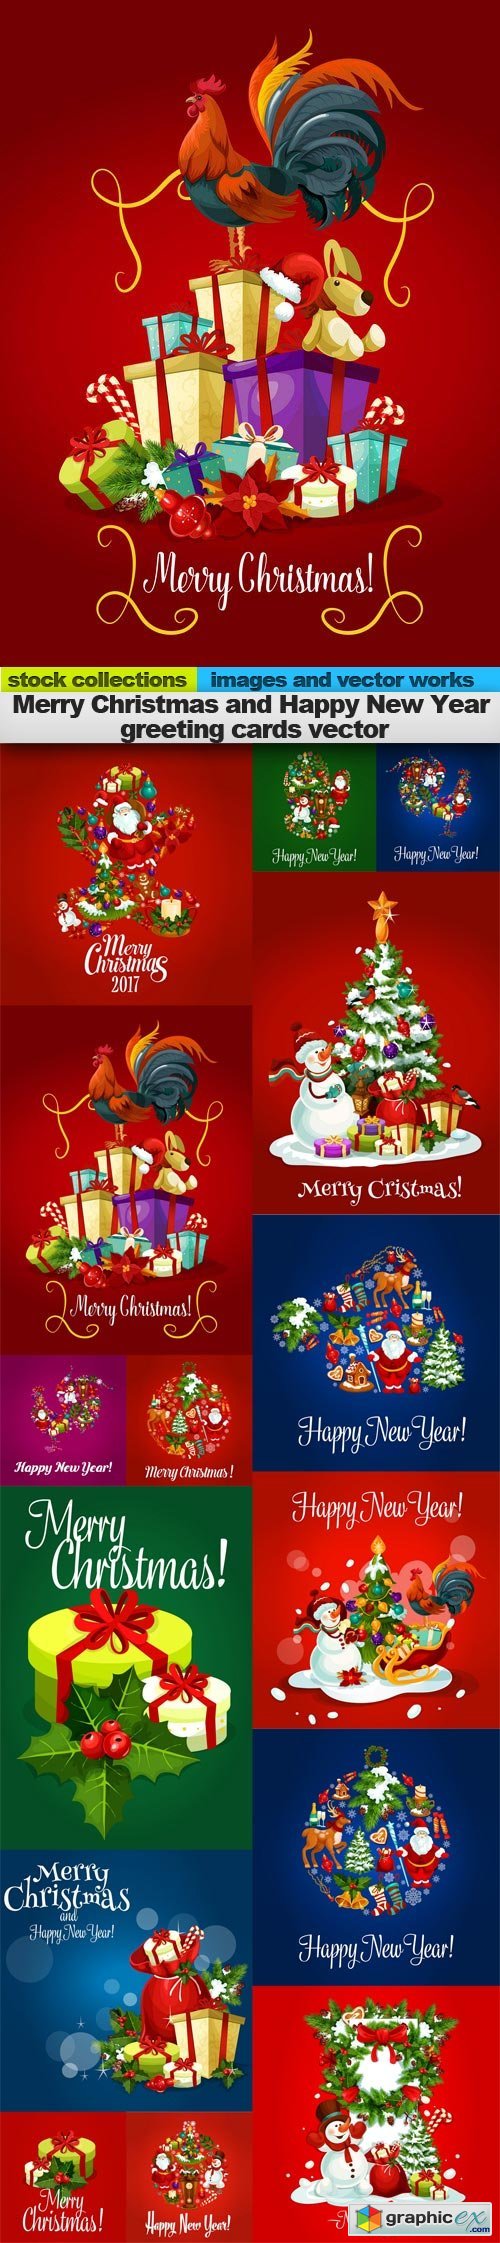 Merry Christmas and Happy New Year greeting cards vector, 15 x EPS